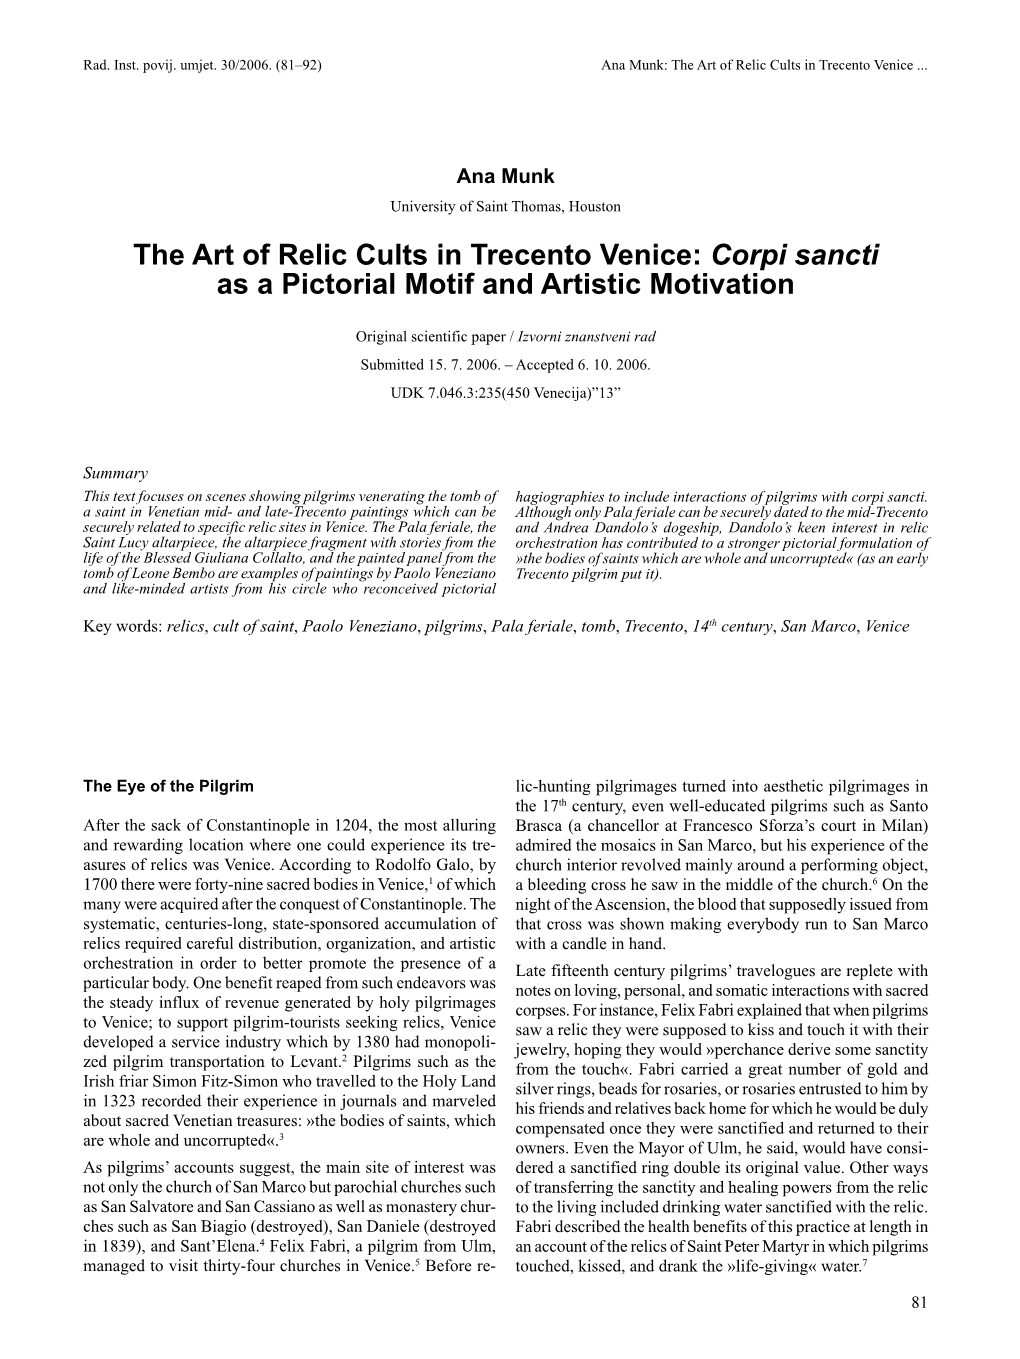 The Art of Relic Cults in Trecento Venice: Corpi Sancti As a Pictorial Motif and Artistic Motivation